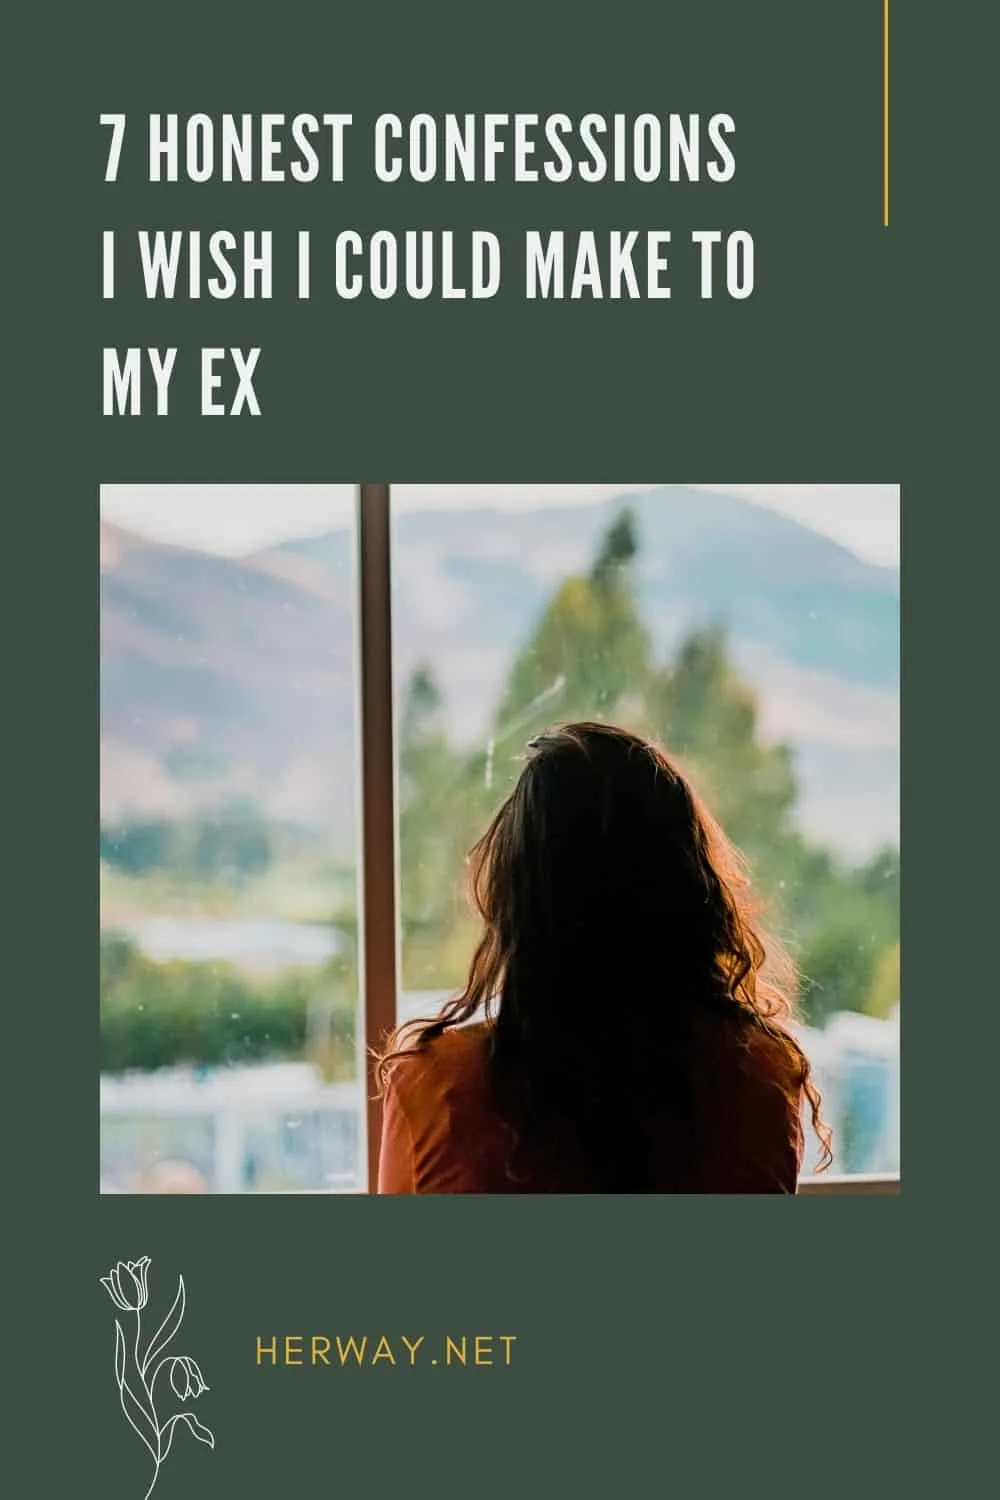 7 Honest Confessions I Wish I Could Make To My Ex